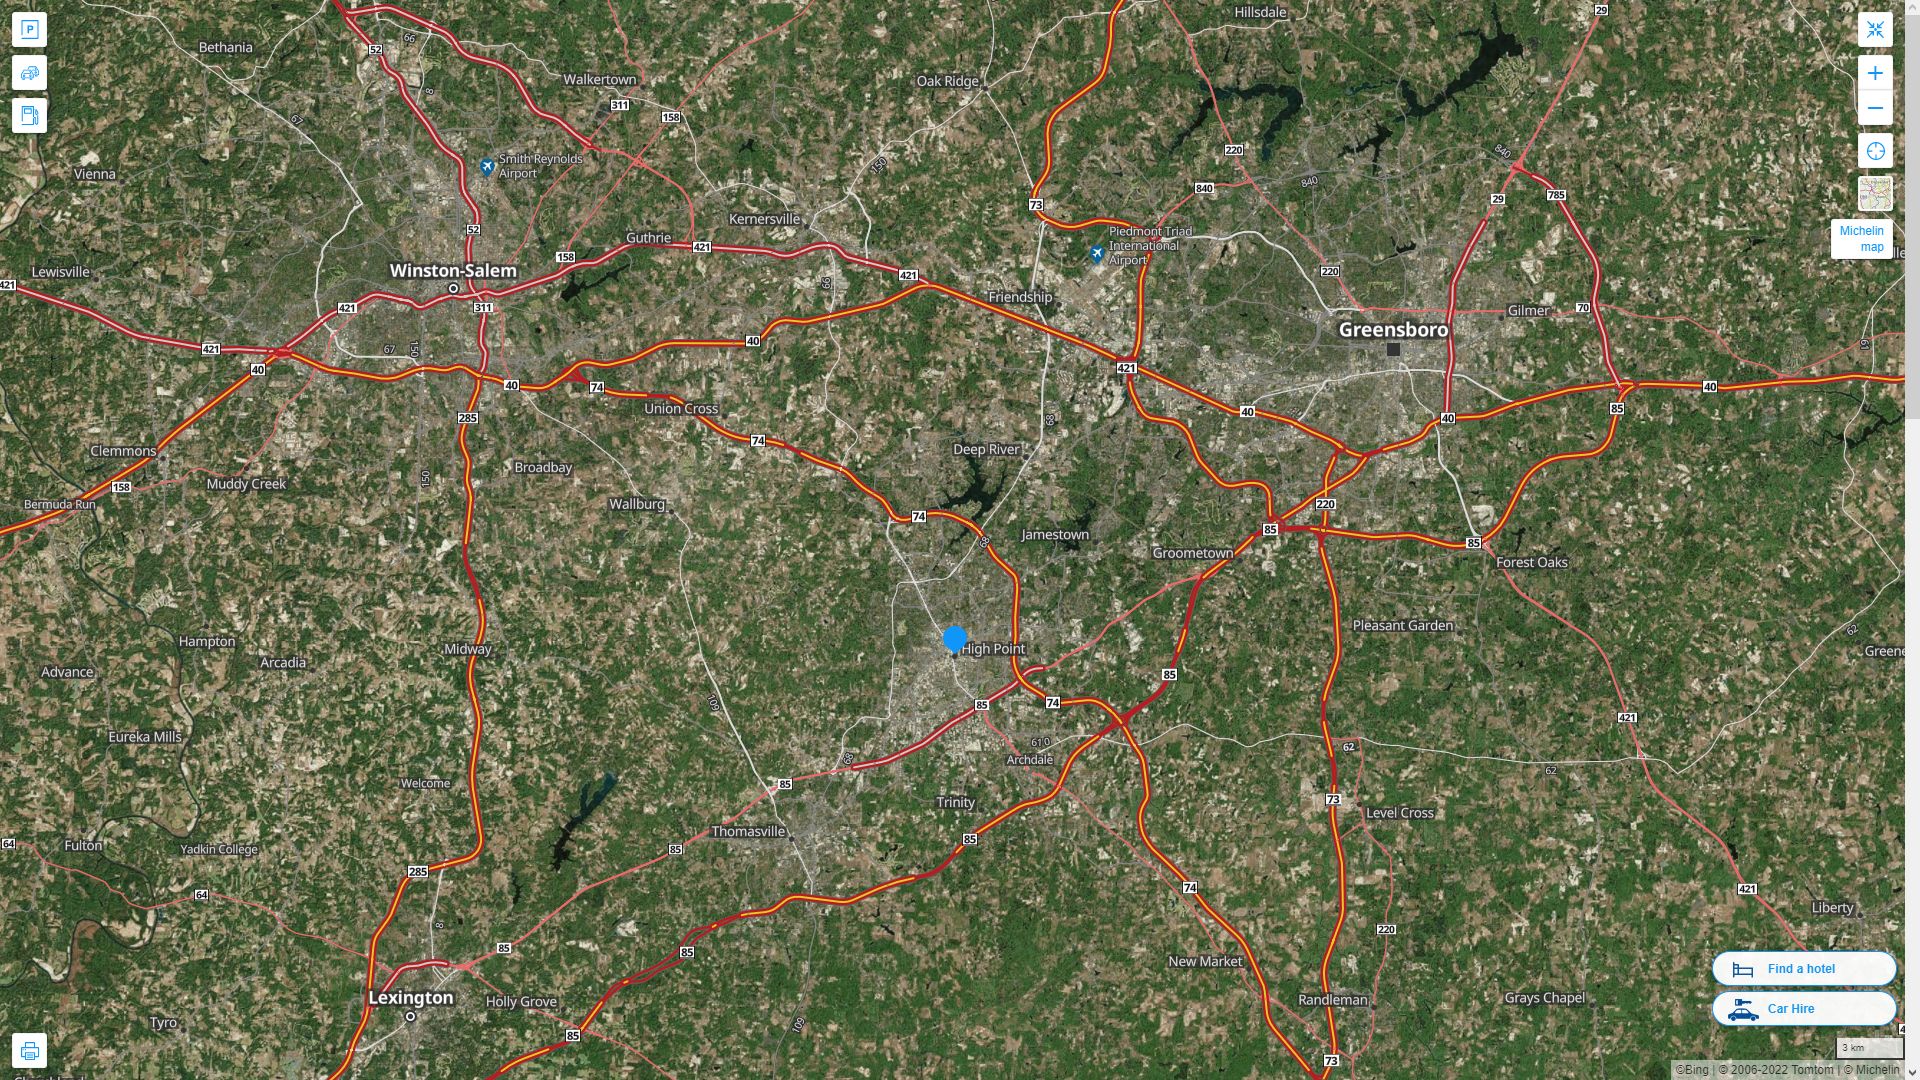 High Point North Carolina Highway and Road Map with Satellite View